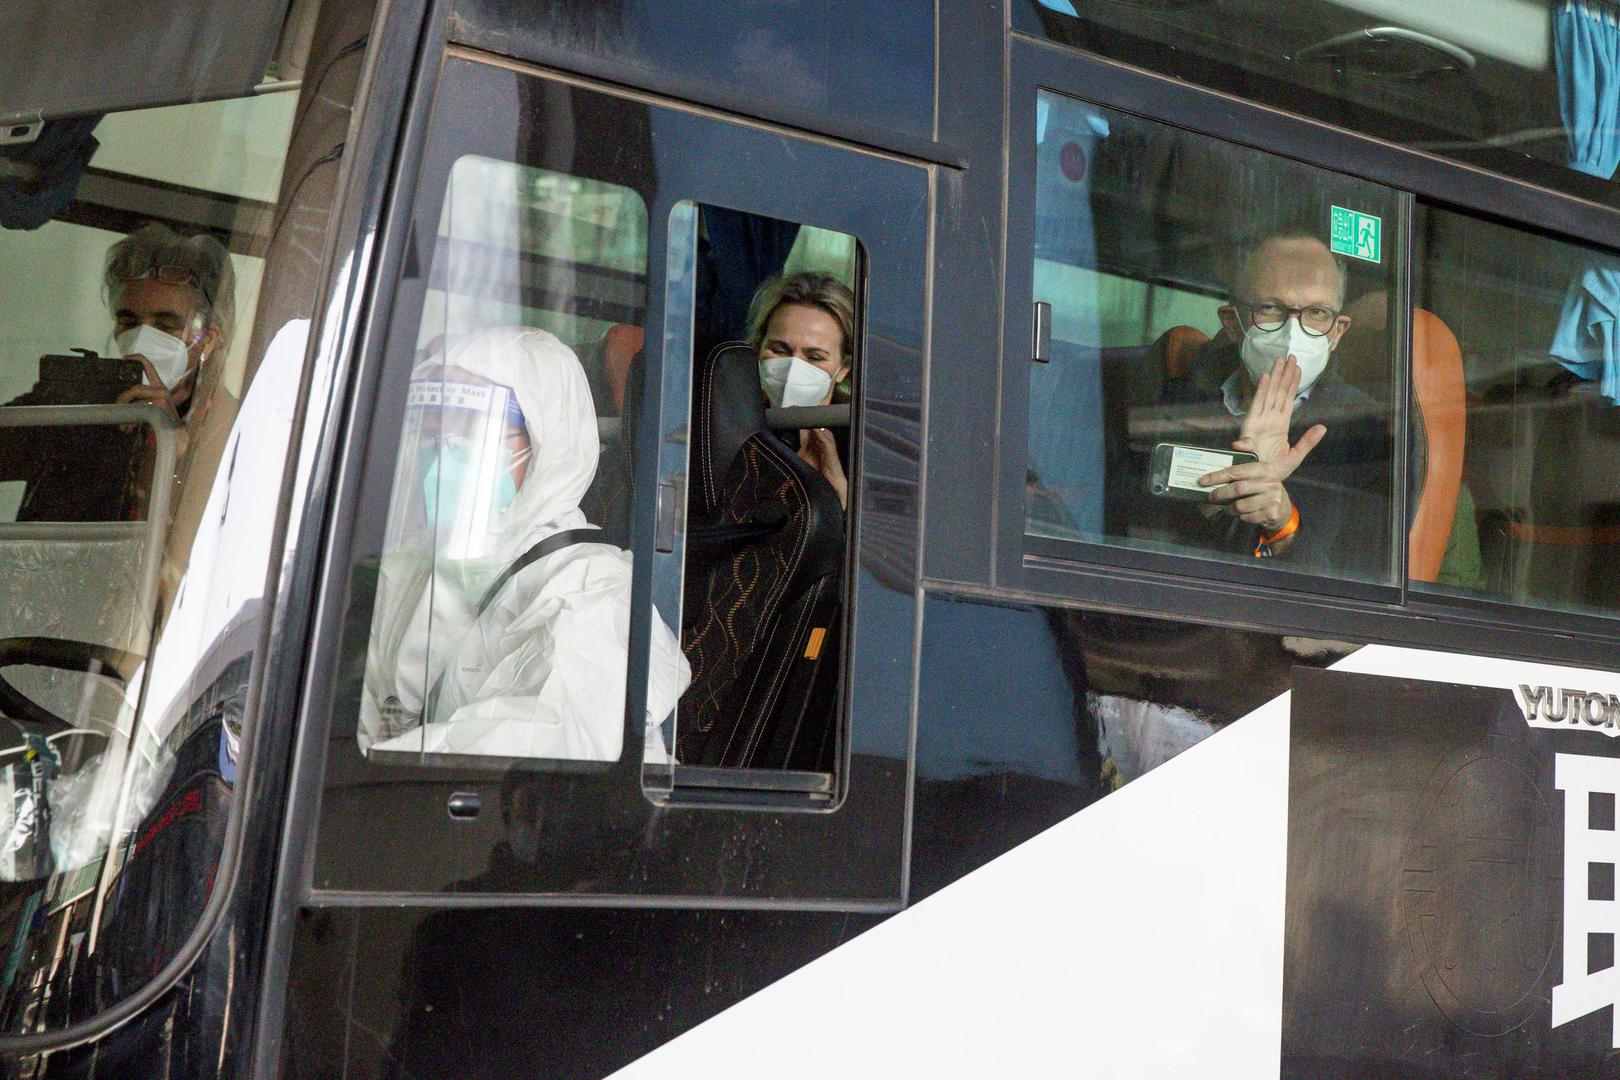 Members of the WHO team tasked with investigating the origins of the coronavirus disease (COVID-19) pandemic in Wuhan Members of the World Health Organisation (WHO) team tasked with investigating the origins of the coronavirus disease (COVID-19) pandemic sit on a bus while leaving Wuhan Tianhe International Airport in Wuhan, Hubei province, China January 14, 2021. REUTERS/Thomas Peter THOMAS PETER